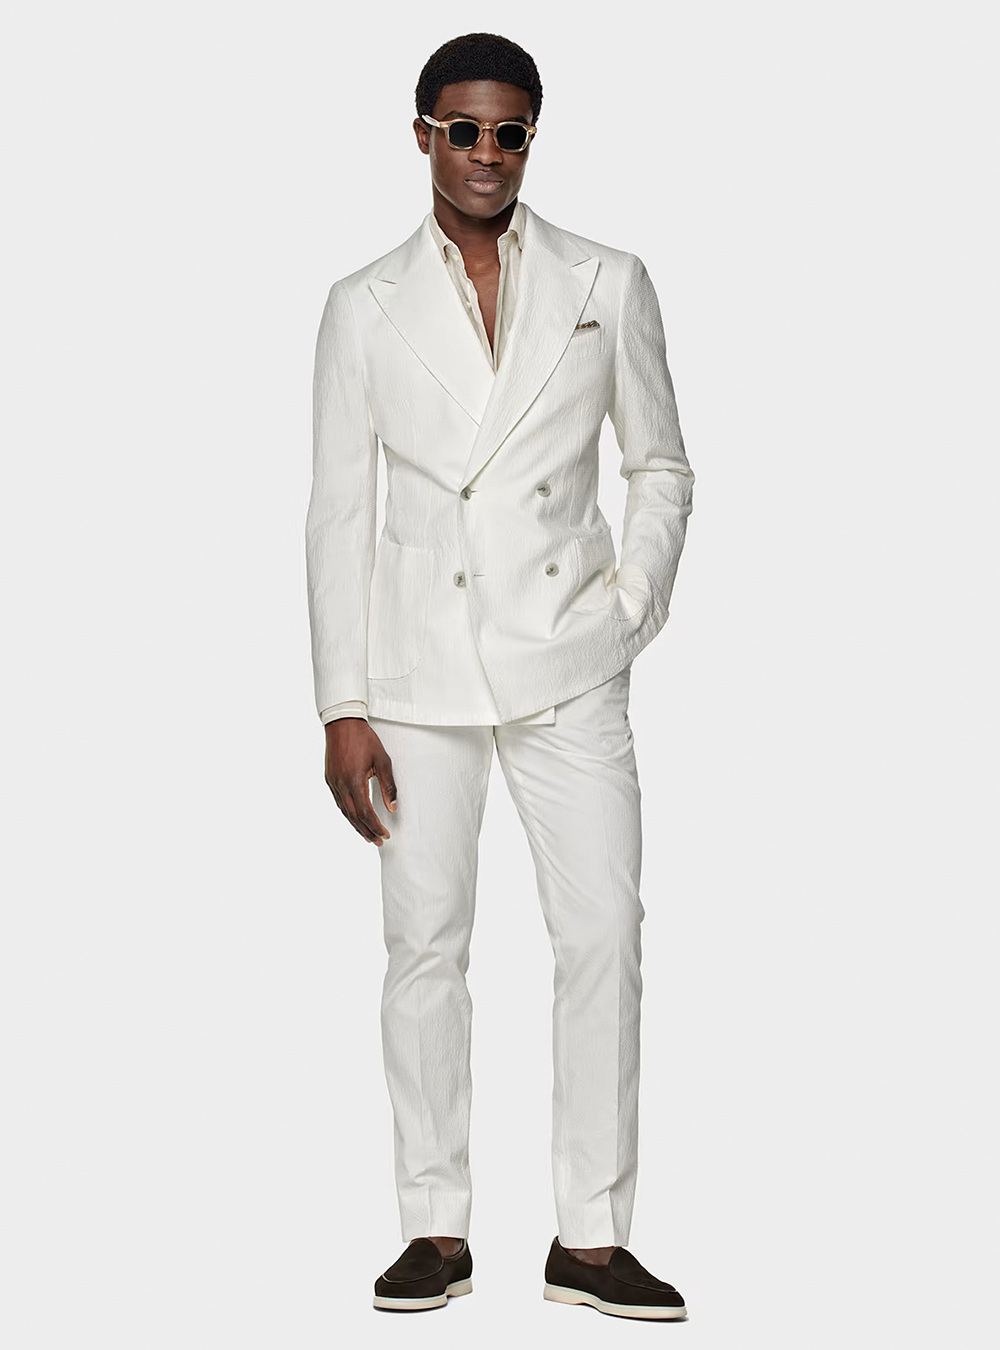 double-breasted white suit, tan shirt, and dark brown loafers